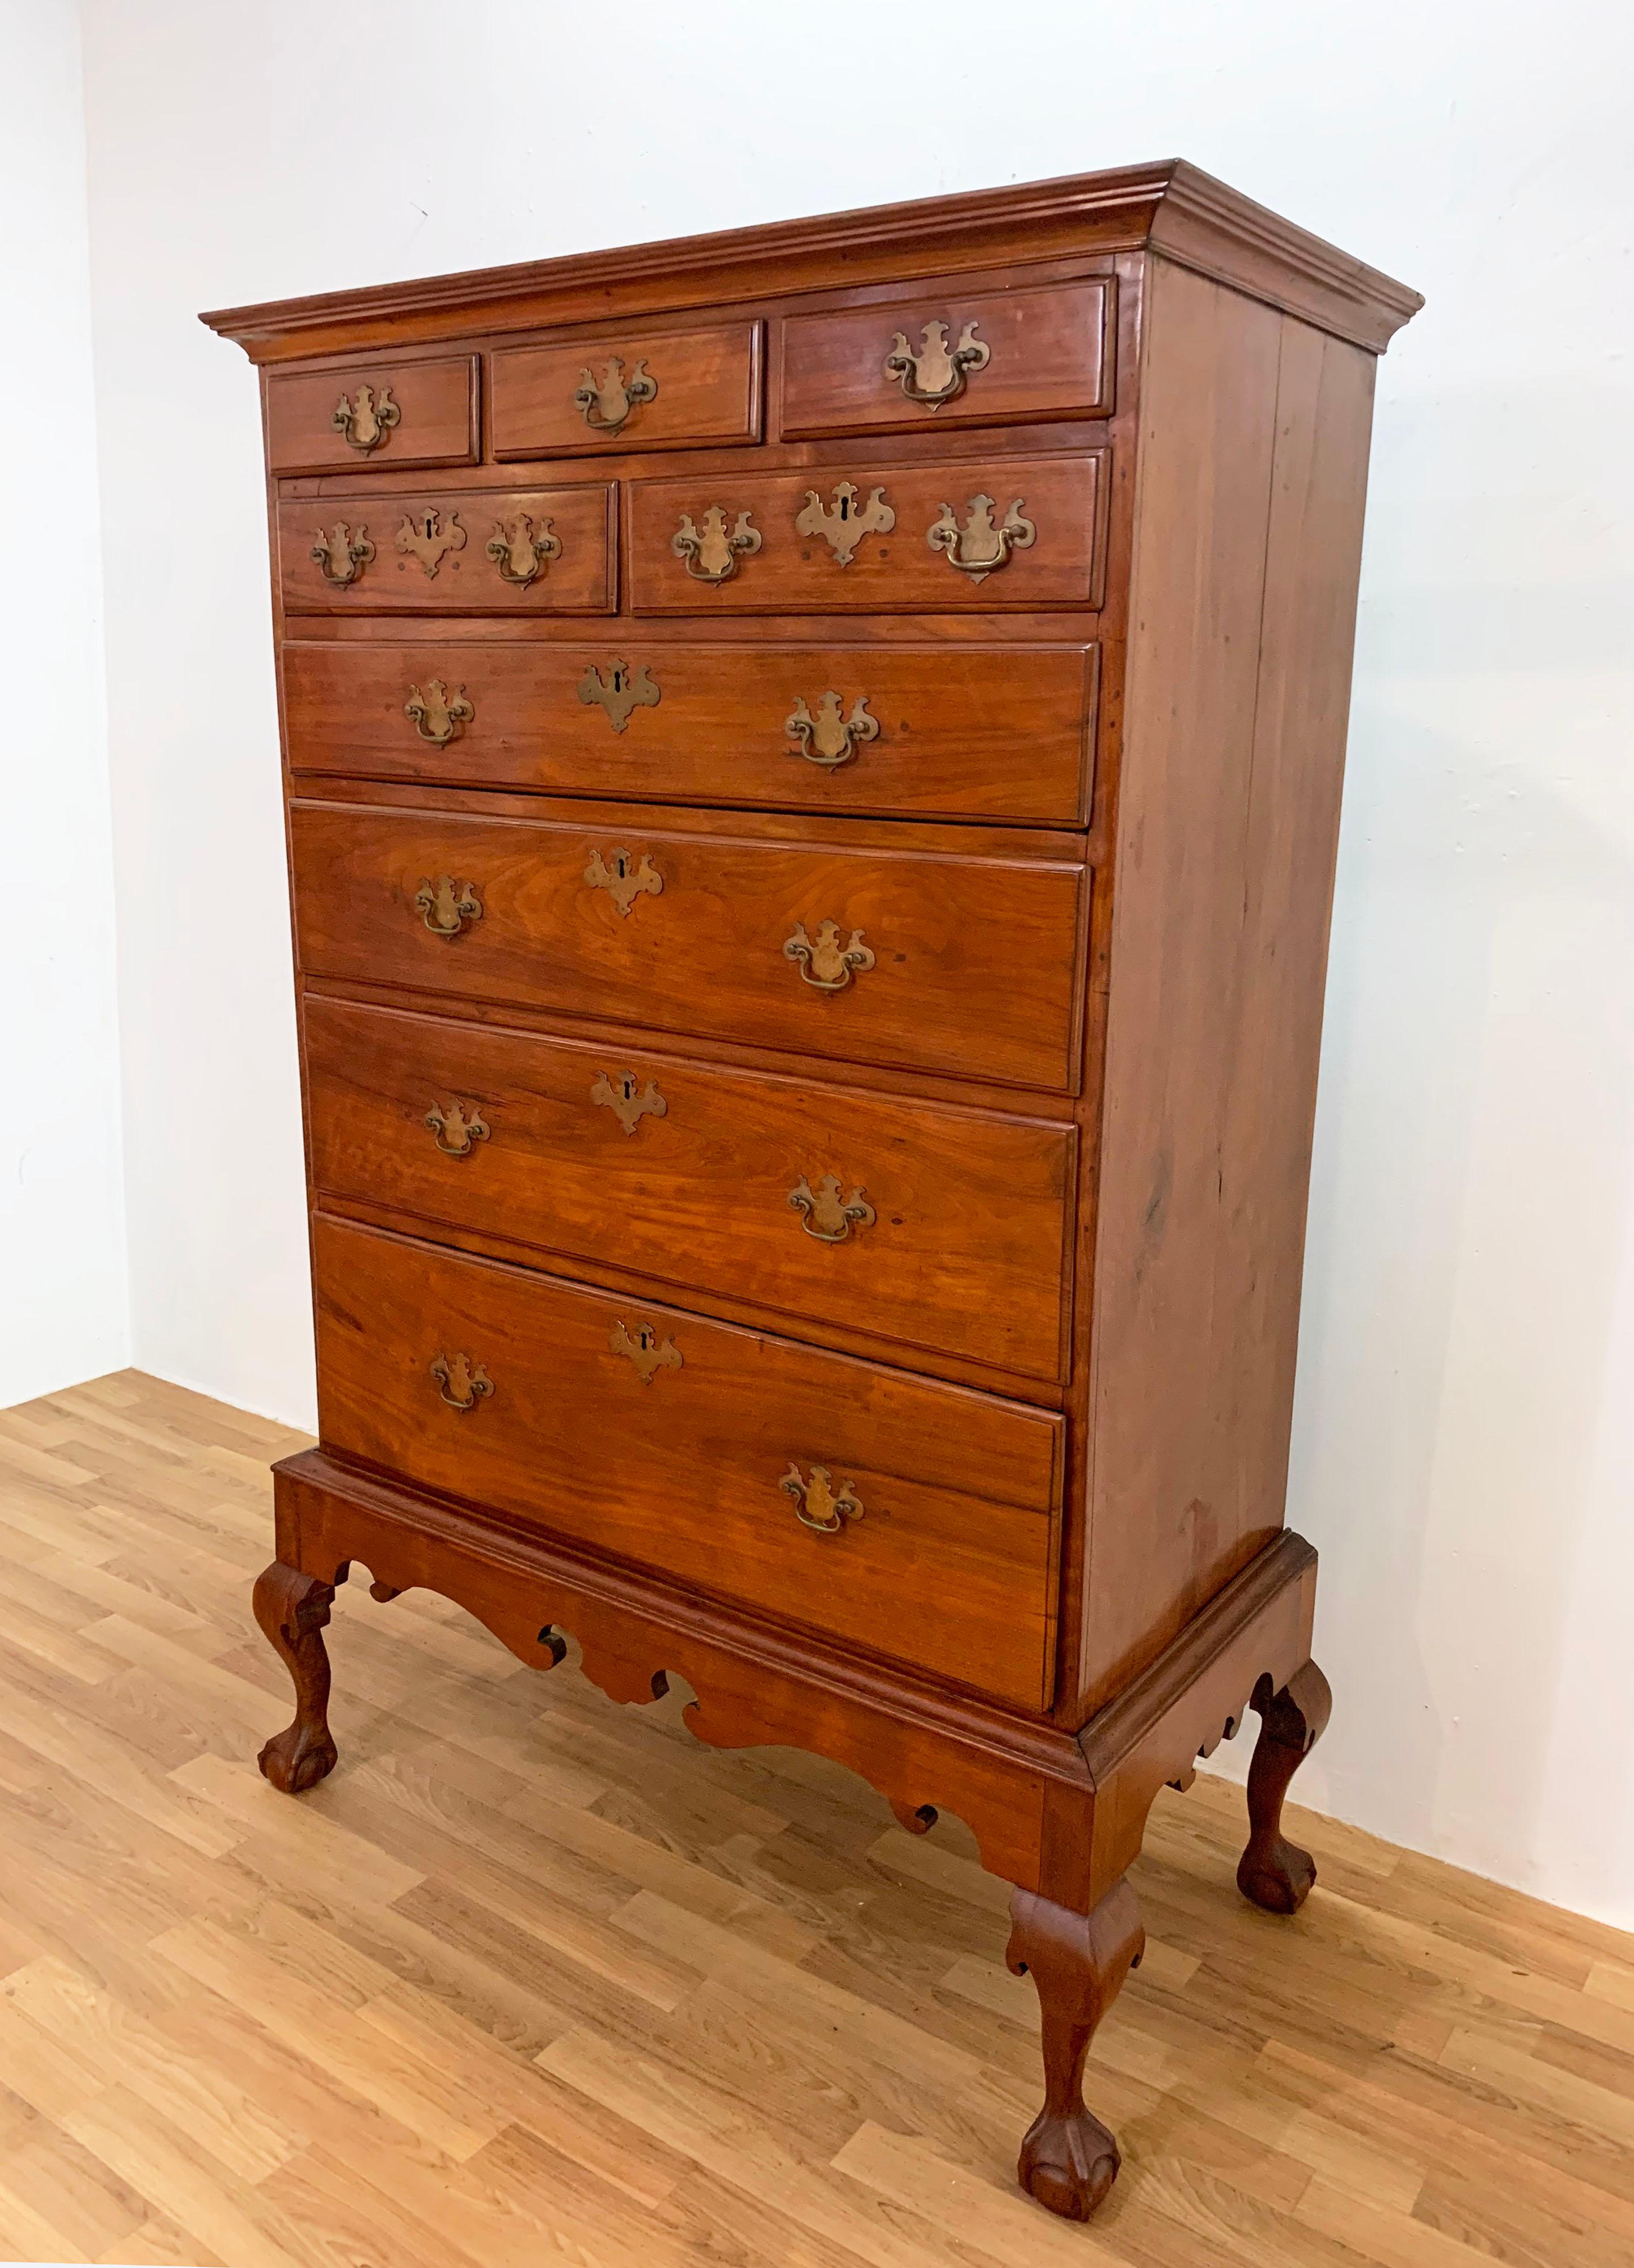 A Queen Anne style flat top chest in cherry of three drawers over two atop four graduated drawers, circa 1760s. Carved apron above spurred cabriole legs. Most likely Western Massachusetts or Eastern New York origin.